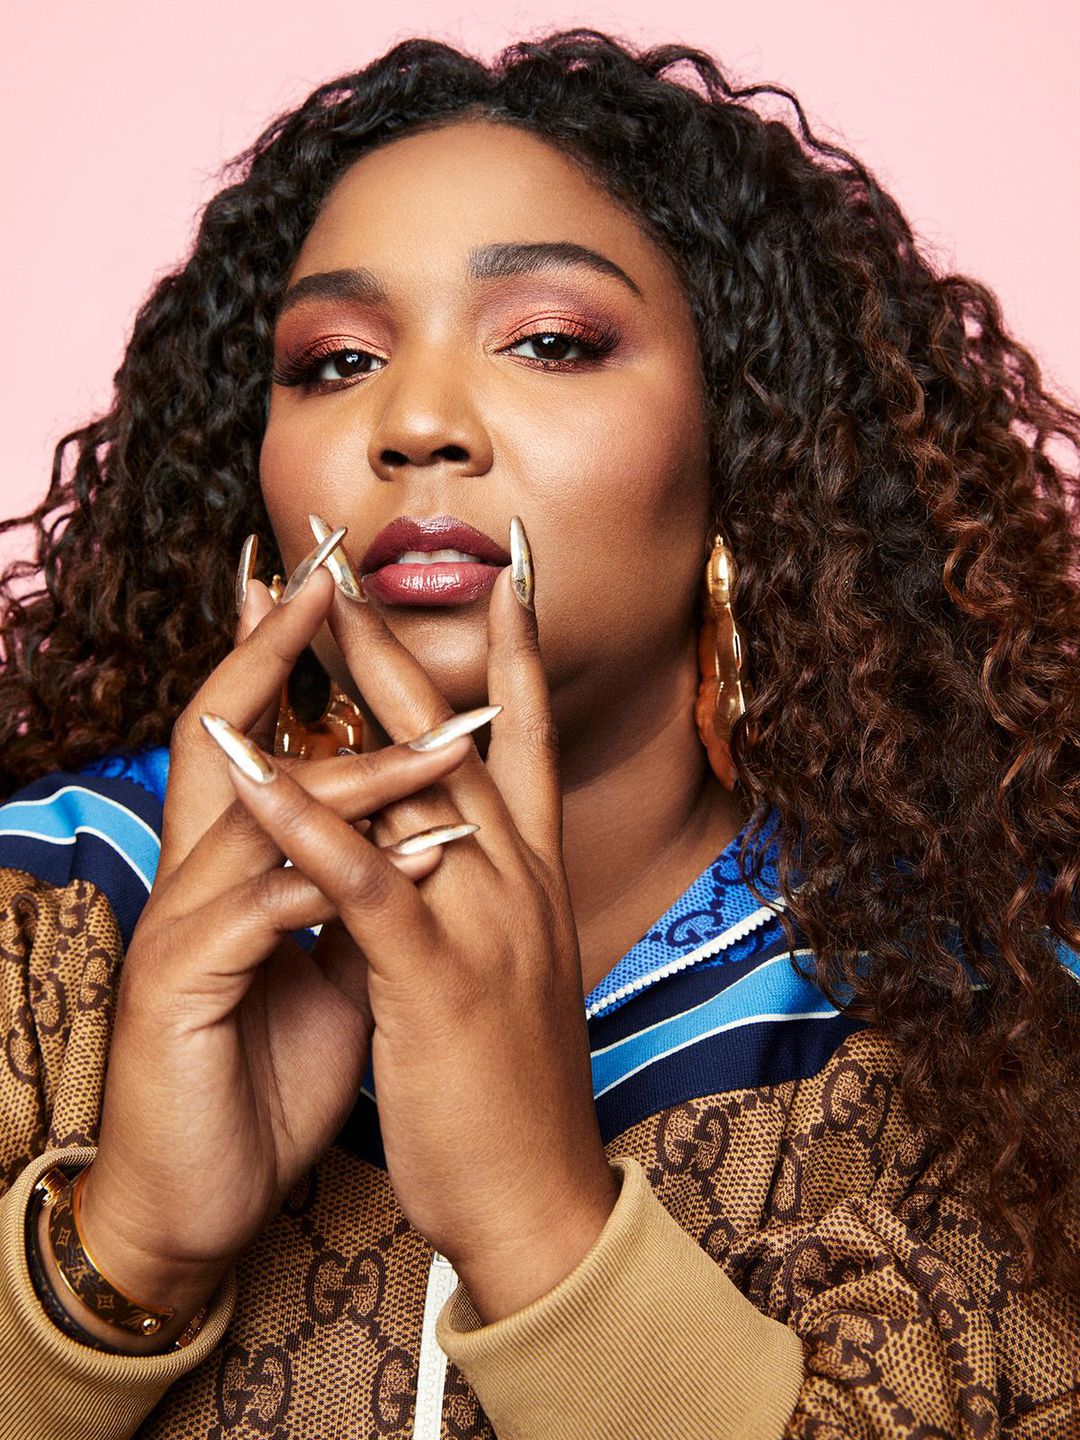 Lizzo place of birth